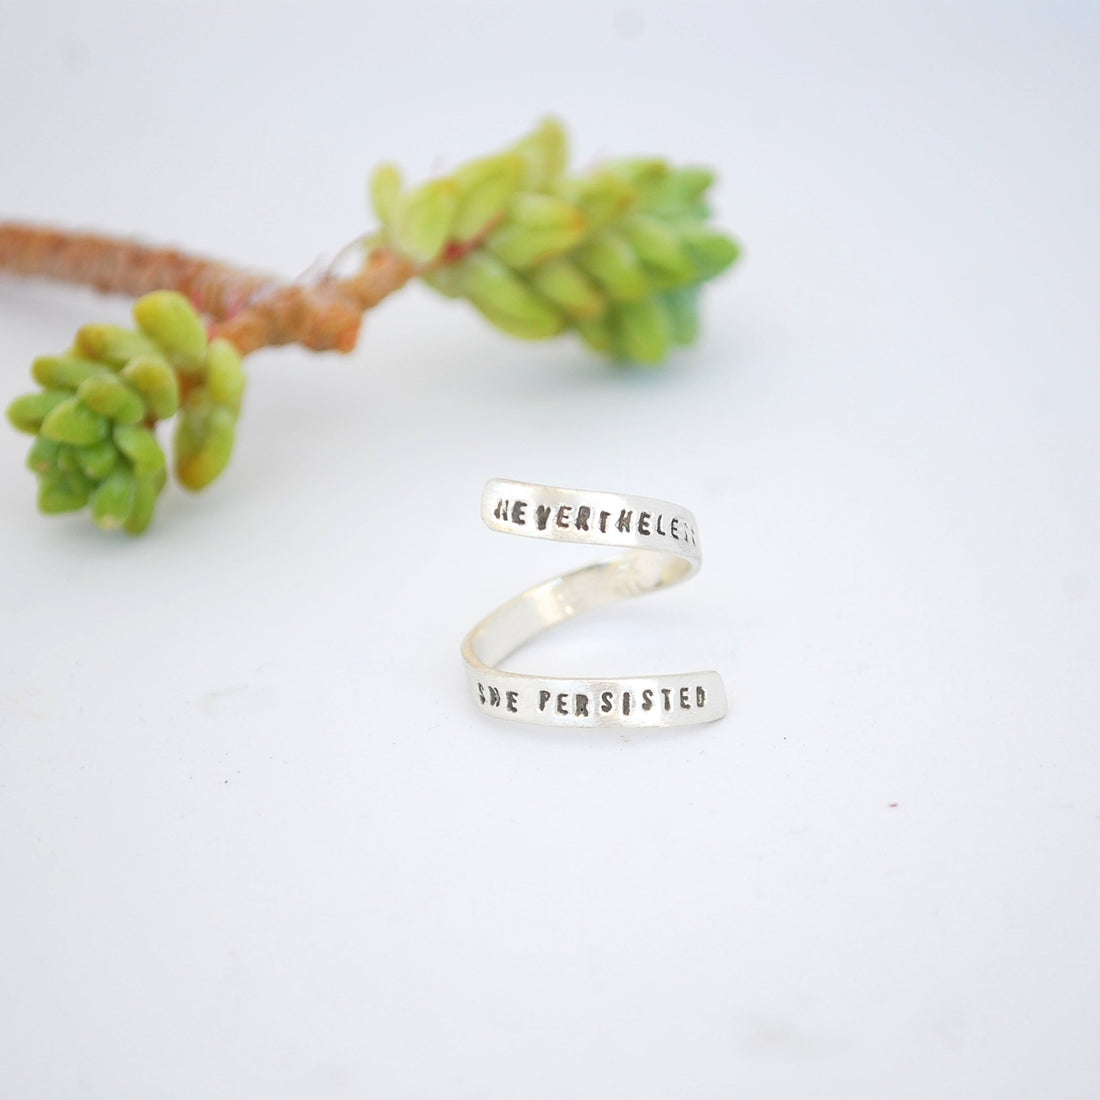 "Nevertheless She Persisted" Wrap Ring - Chocolate and Steel